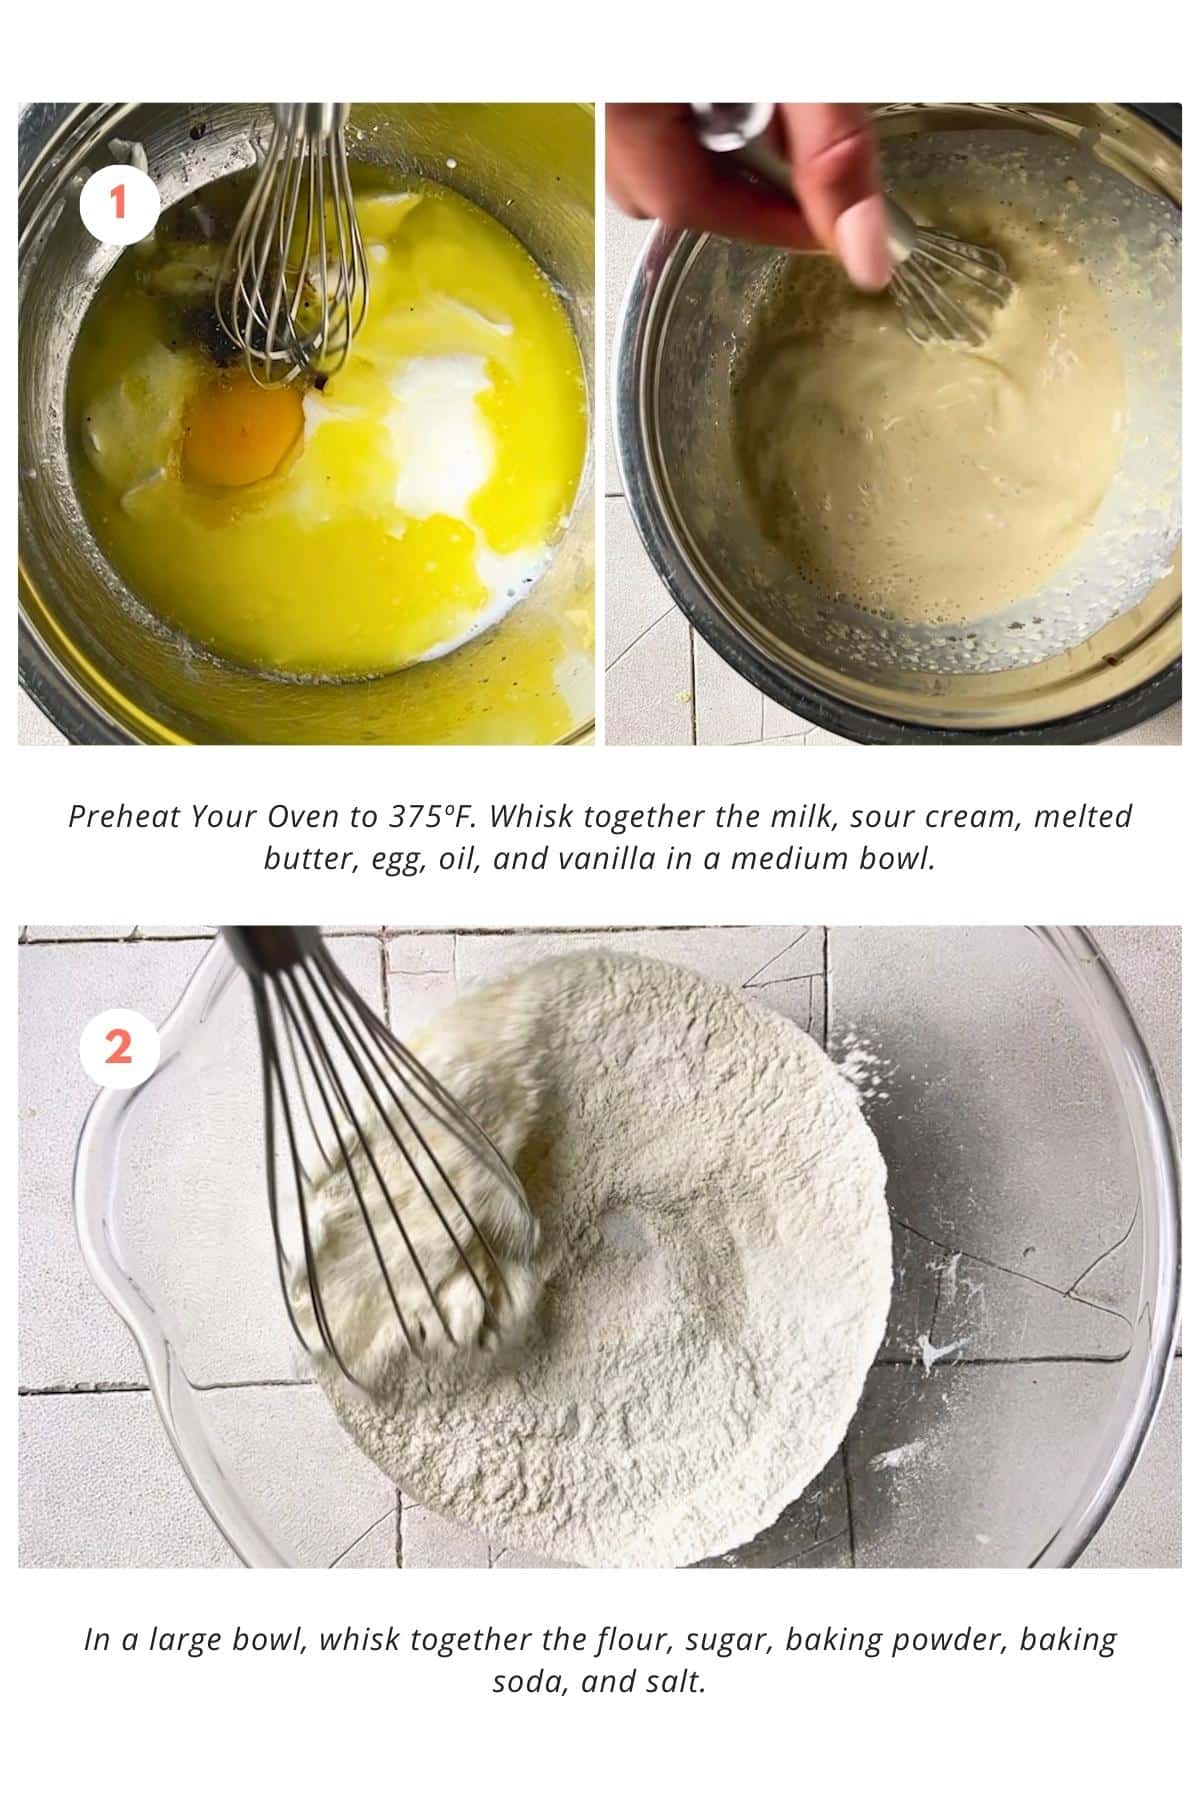 Oven preheated to 375ºF. Wet ingredients combined in a medium bowl, including milk, sour cream, melted butter, egg, oil, and vanilla. Dry ingredients mixed in a large bowl, including flour, sugar, baking powder, baking soda, and salt.